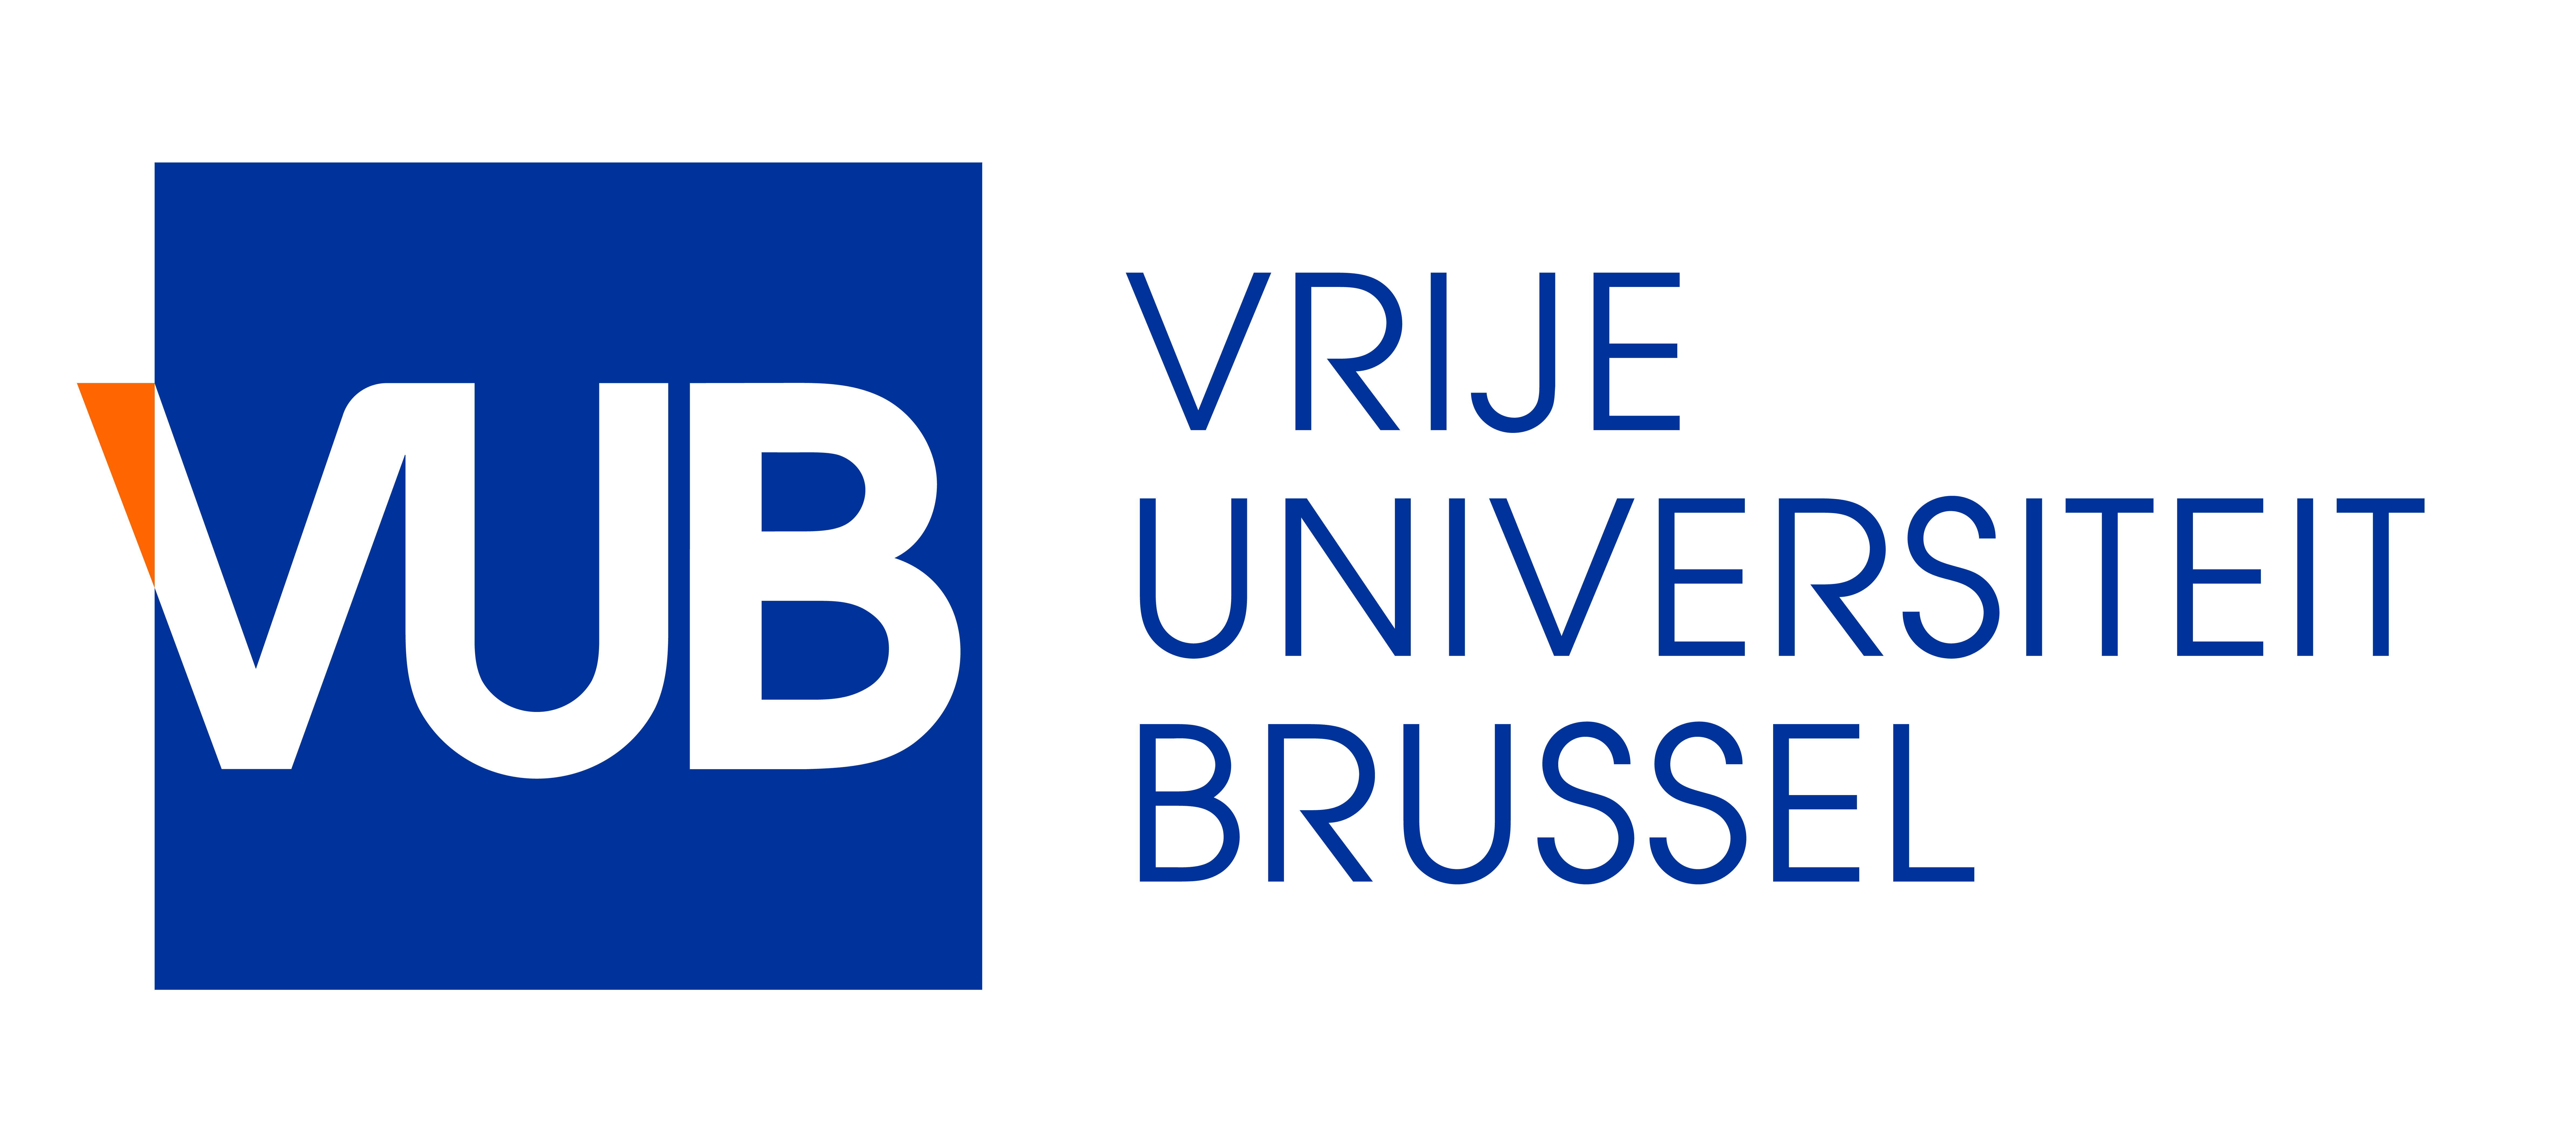 Feedback on EU-CHINA DOC Conference and Workshop on European Doctoral Education & EU-China Dialogue and Cooperation in Doctoral Education & Research, held on 8-9 May 2014 at Vrije Universiteit Brussel